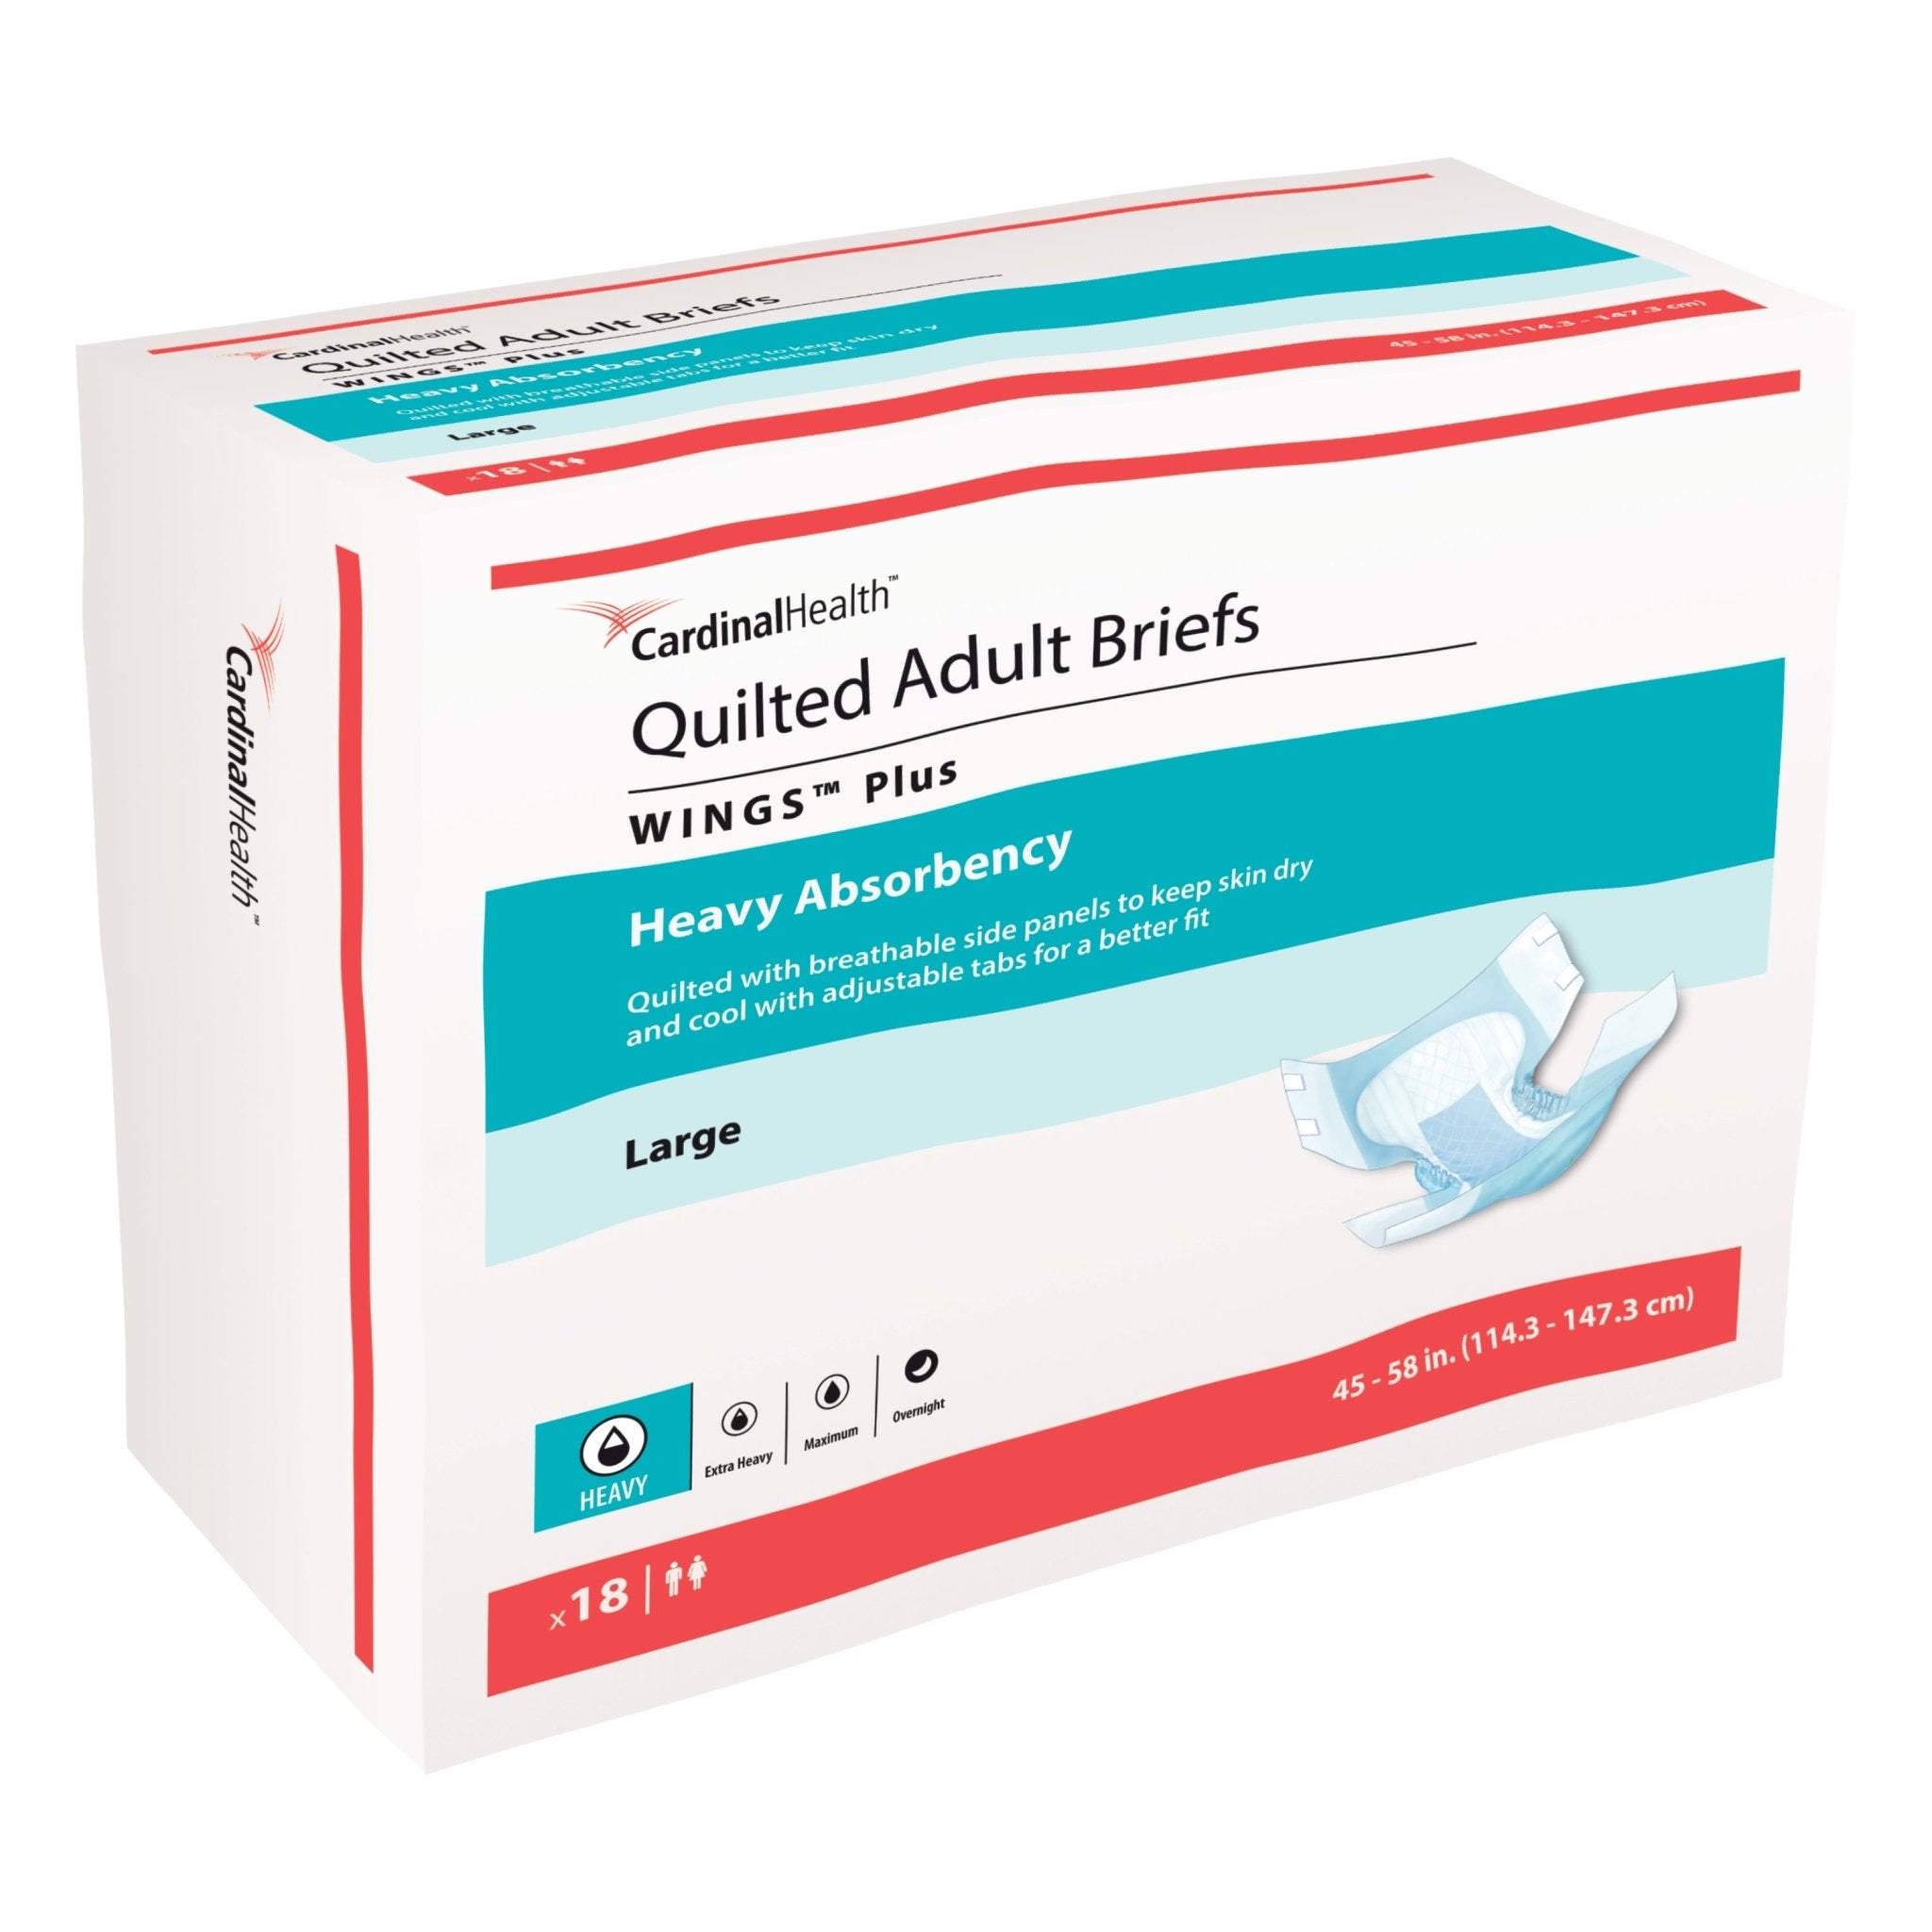 CA/72 - Cardinal Health, Quilted Adult Briefs, Wings™ Plus, Large, 45" - 58" - Best Buy Medical Supplies